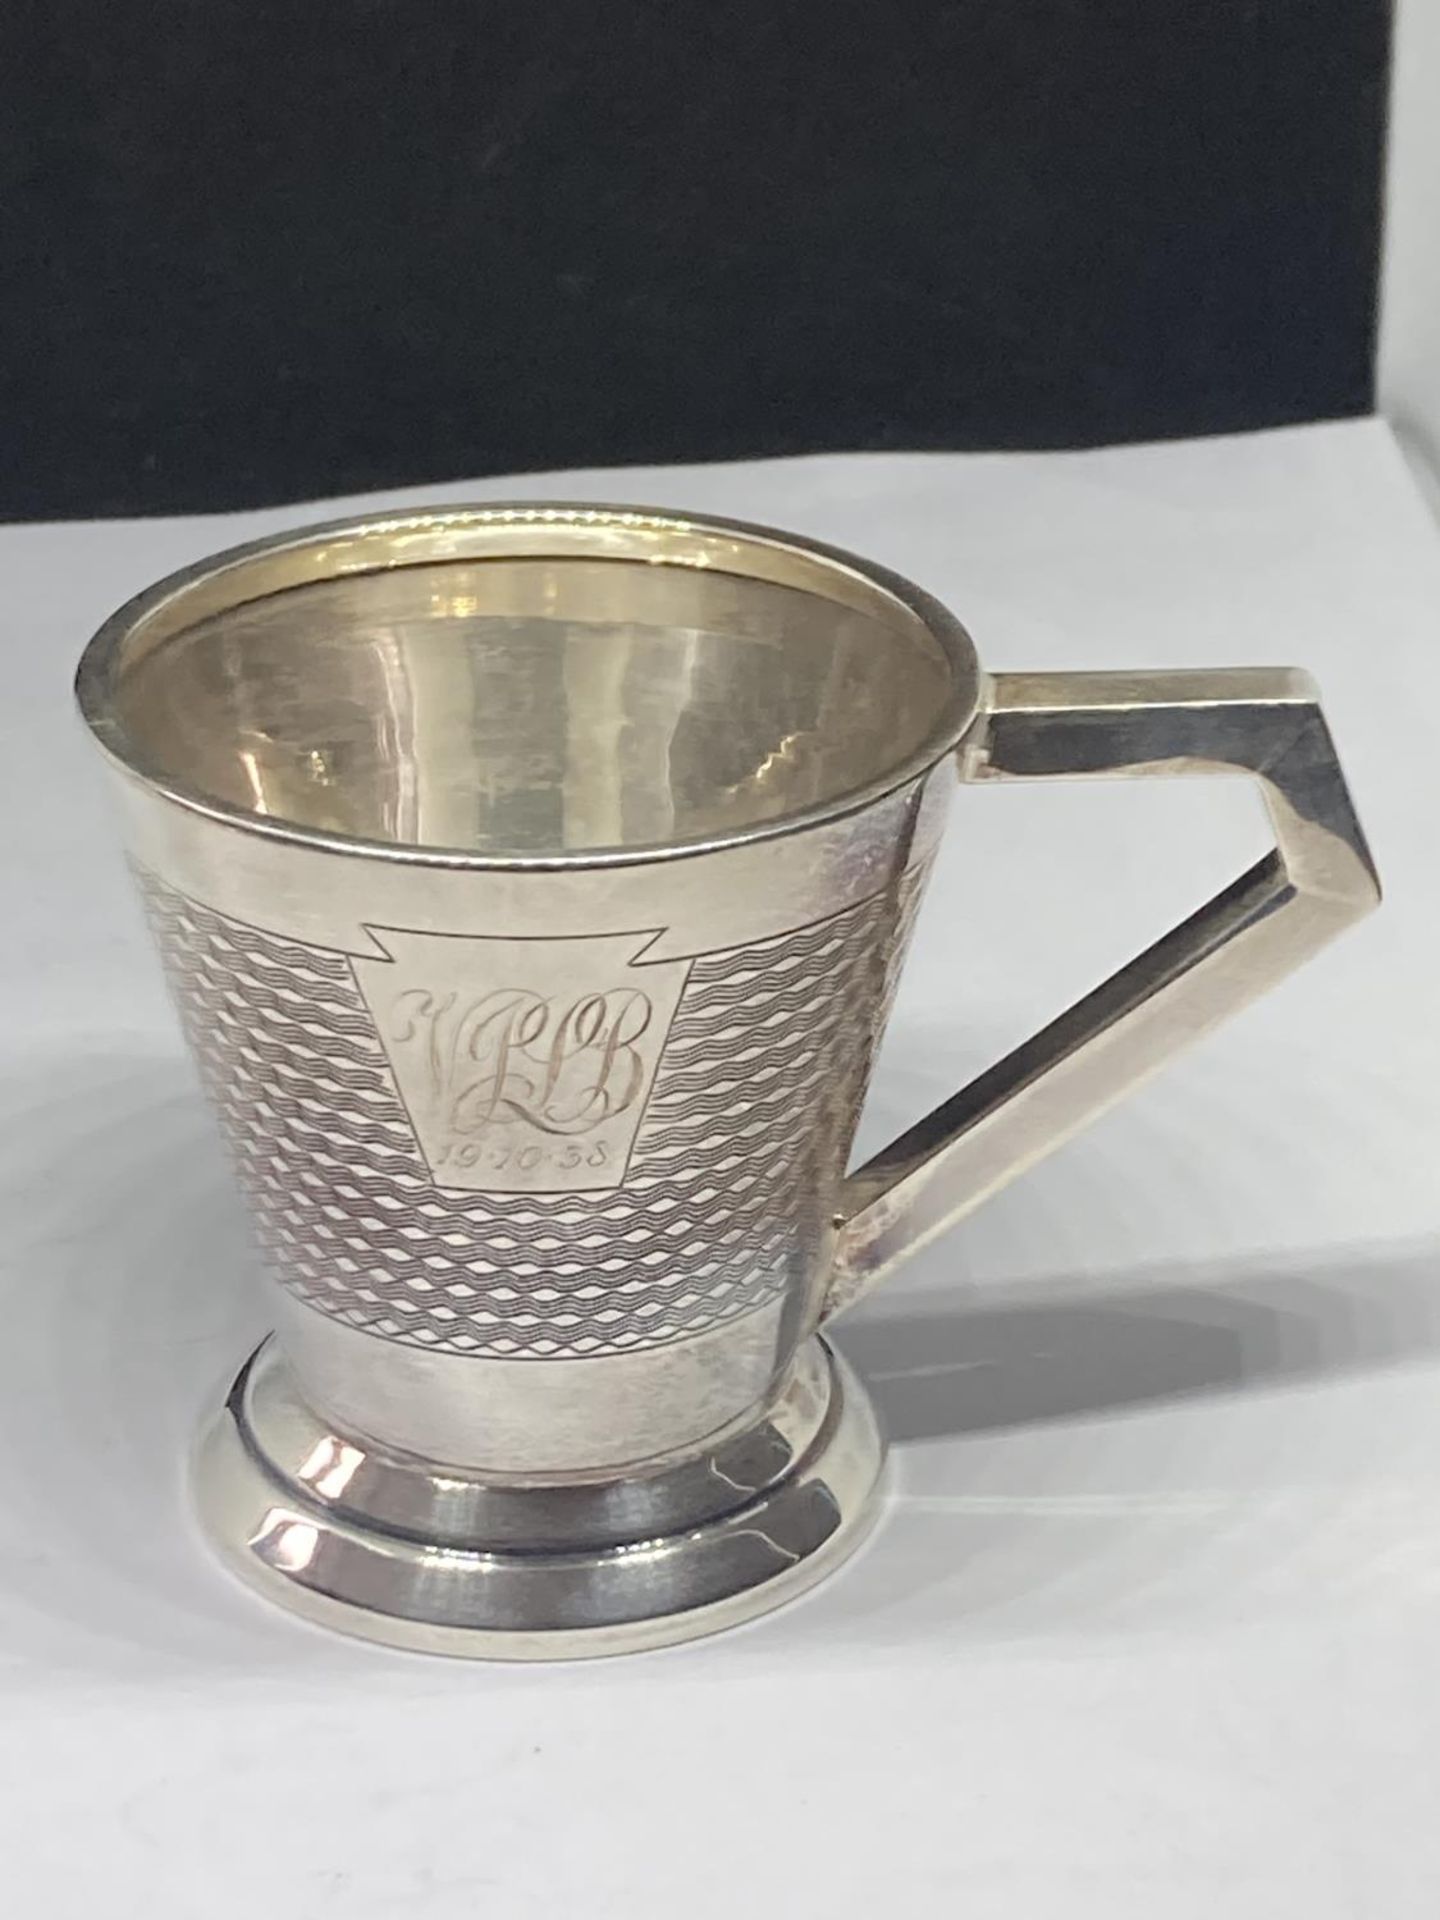 A HALLMARKED BIRMINGHAM SILVER CUP GROSS WEIGHT 75.5 GRAMS (ENGRAVED)